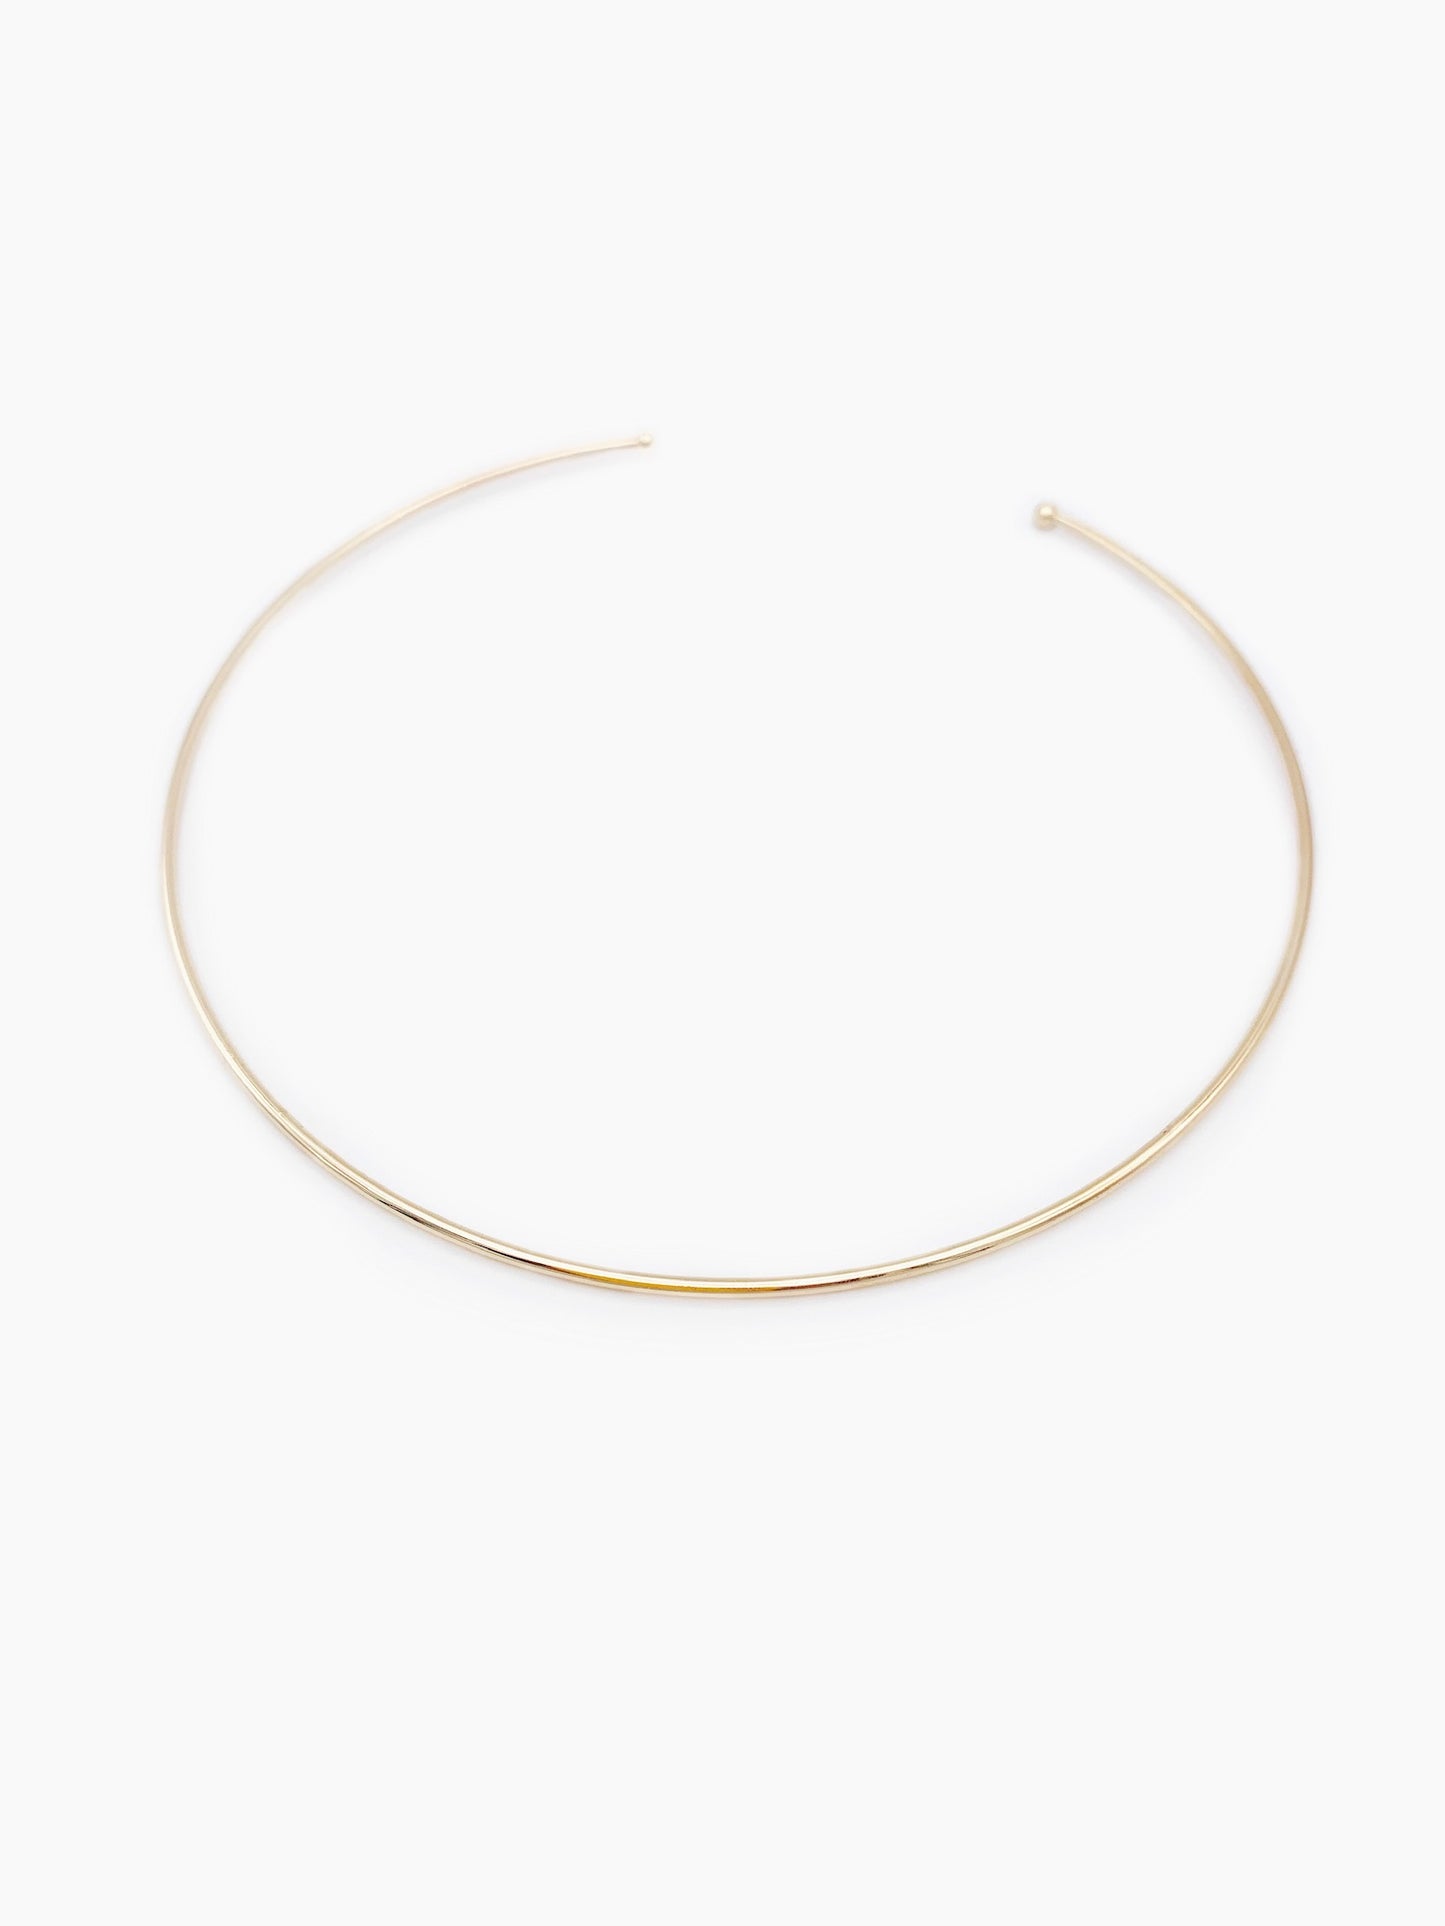 RIGID CHOKER NECKLACE STEEL GOLD PLATED